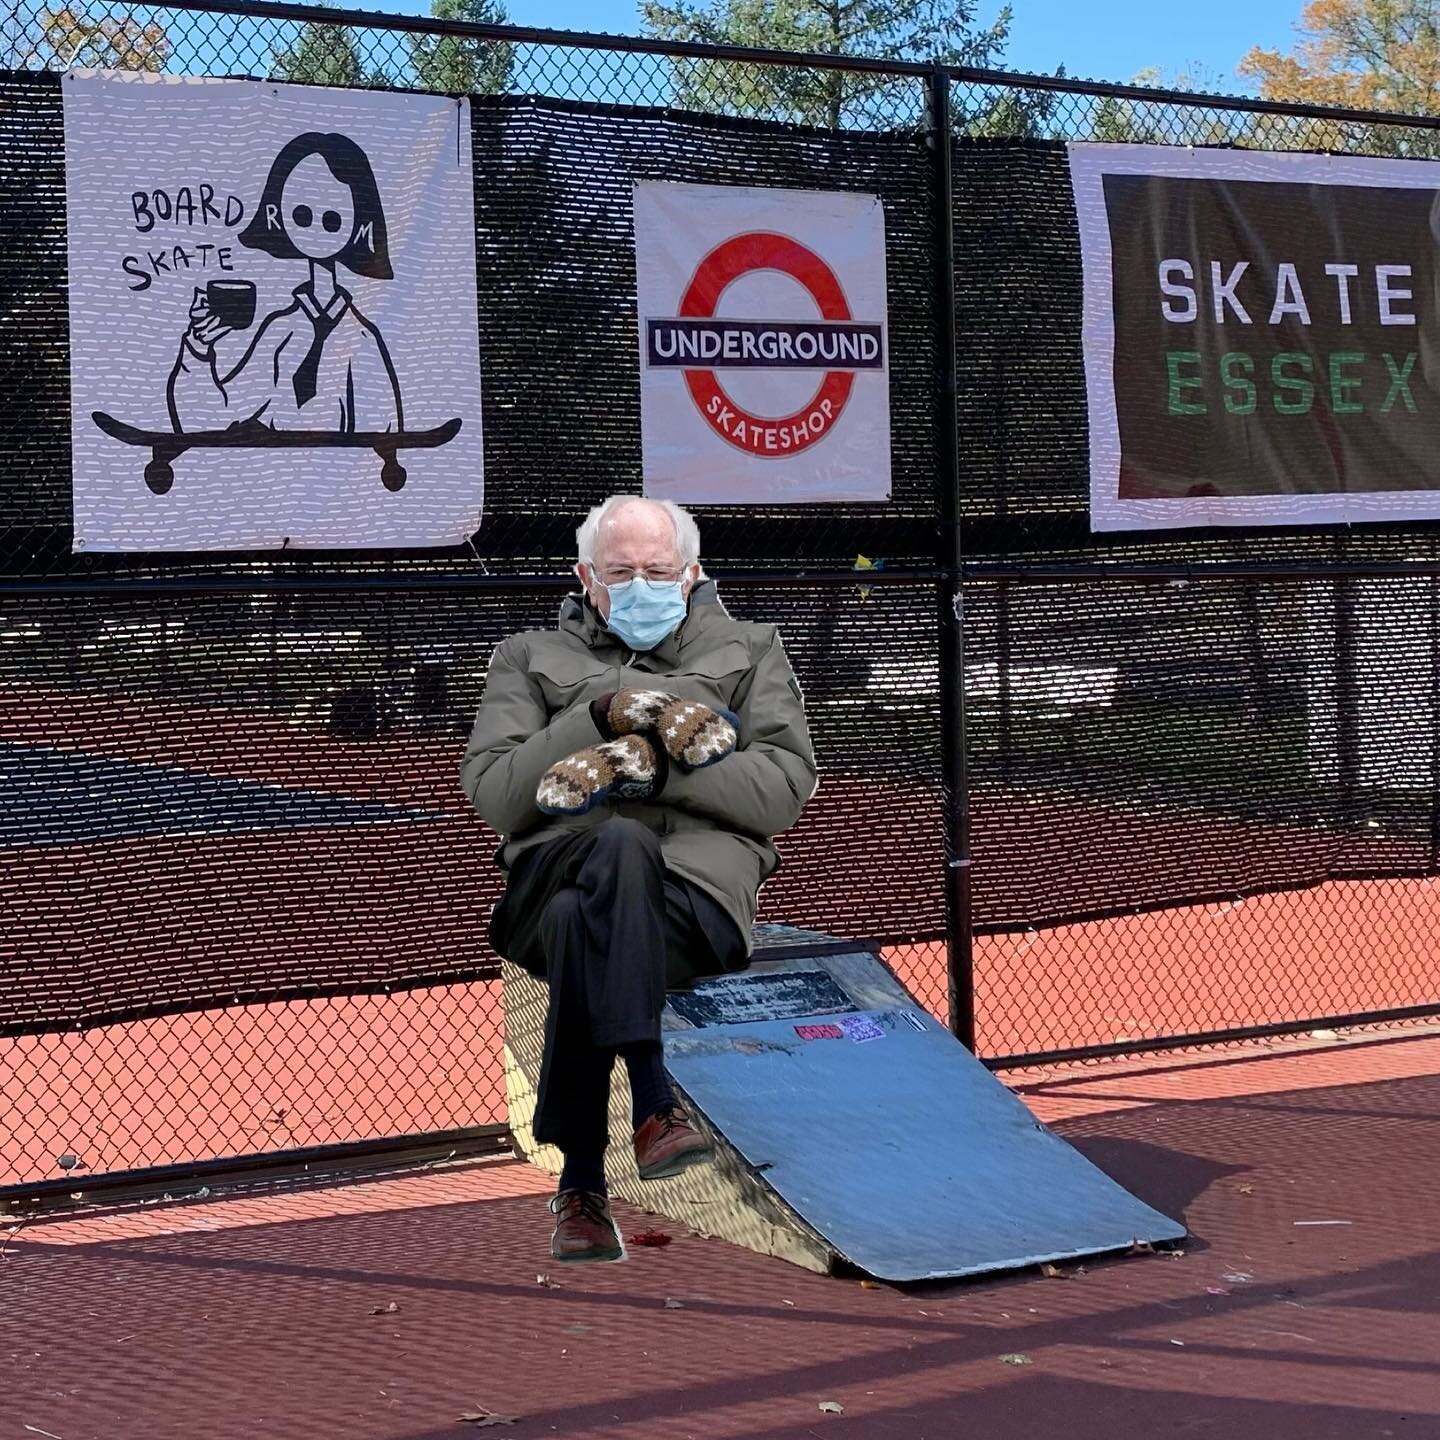 @courtskatepark @shred.co @mhs_skateclub @boardroomskate @unofficial  credit to a Montclair 7th grader for making this for us!!!